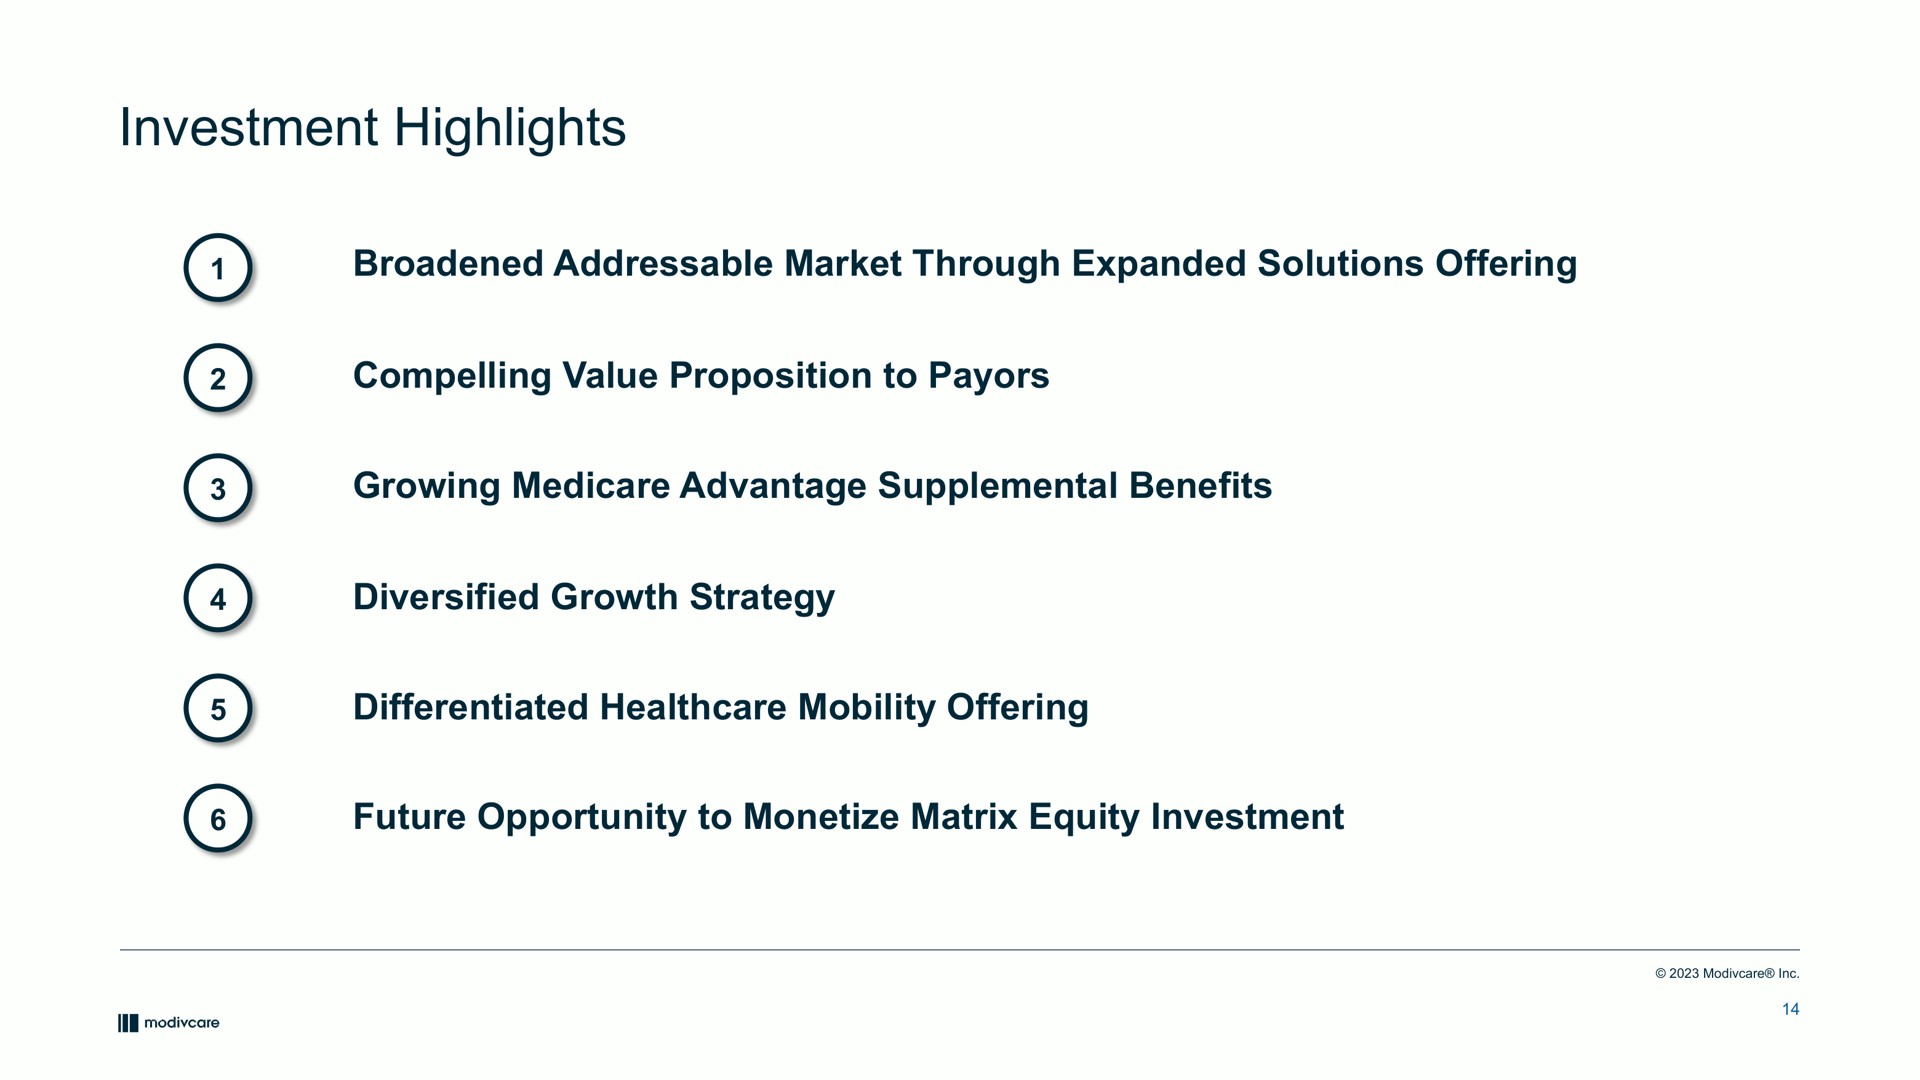 investment highlights broadened market through expanded solutions offering compelling value proposition to growing advantage supplemental benefits diversified growth strategy differentiated mobility offering future opportunity to monetize matrix equity investment | ModivCare